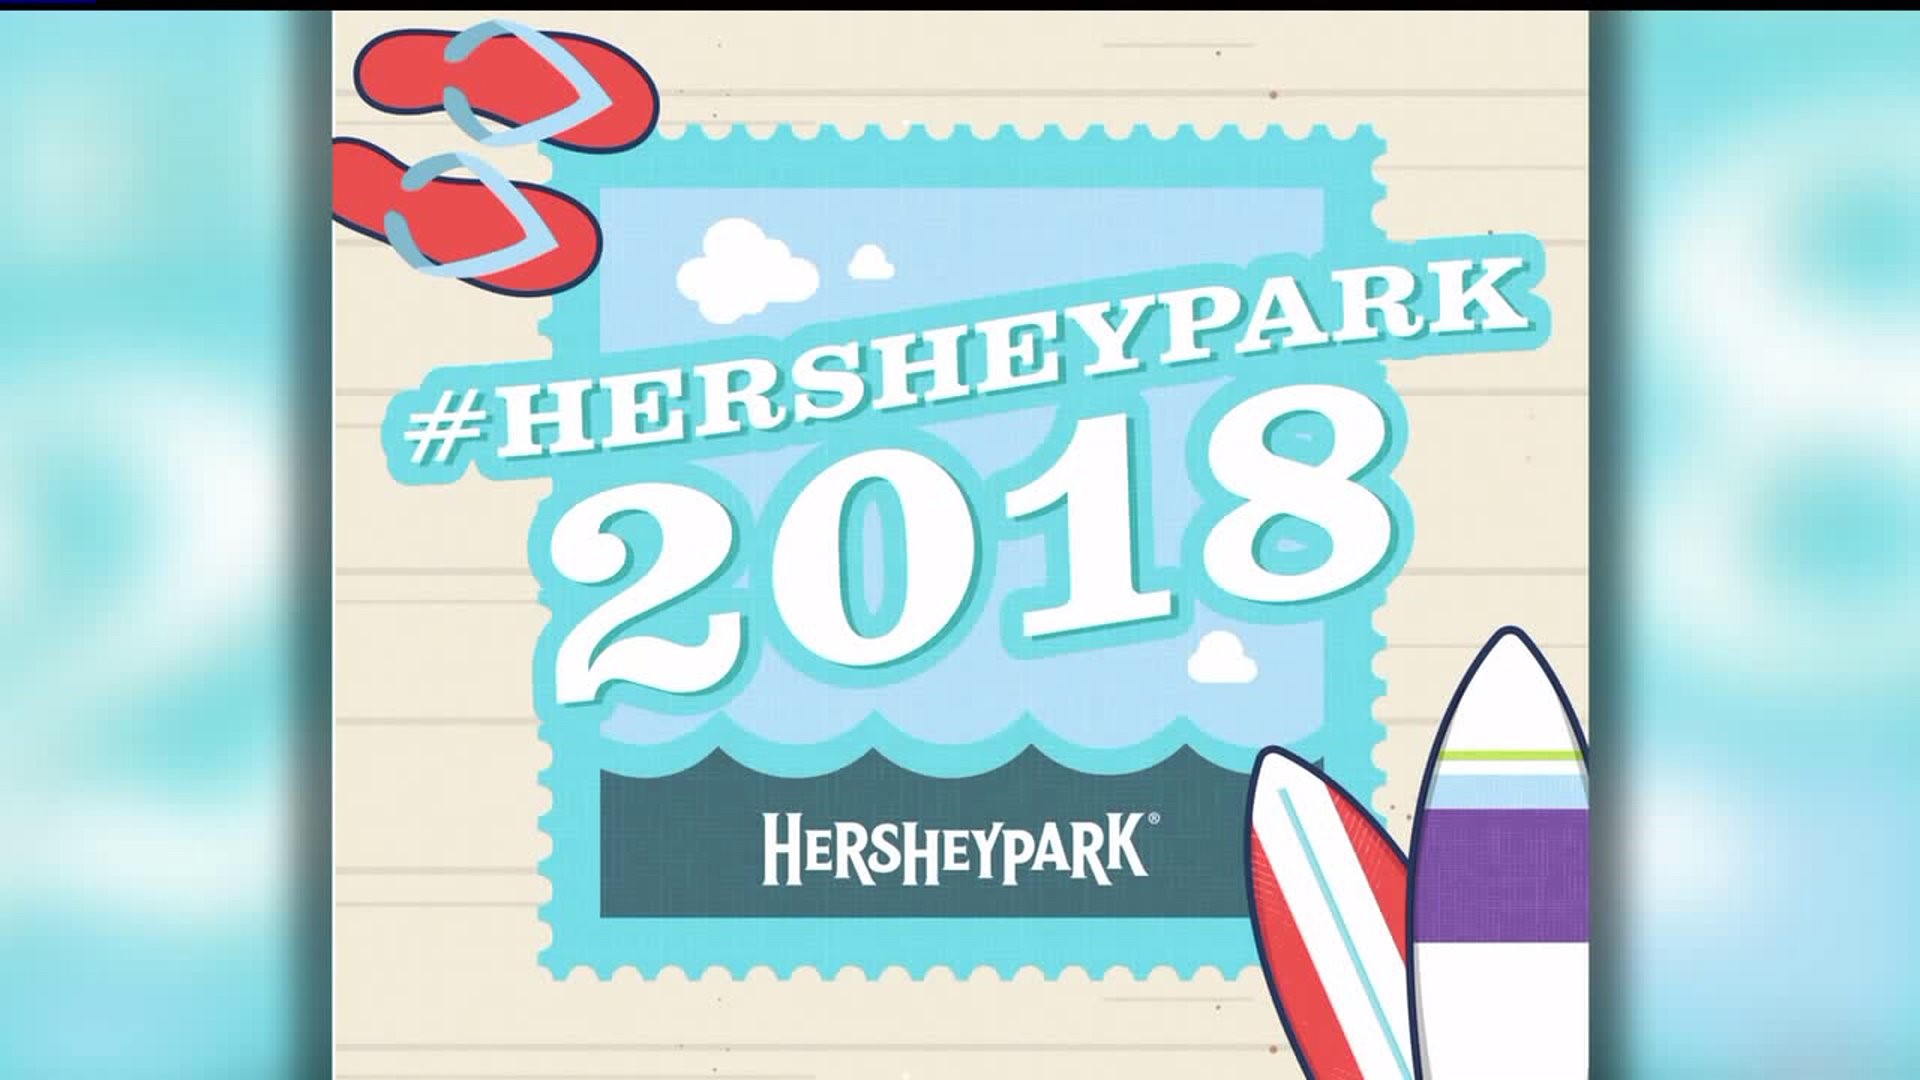 August is a fun filled month in Hershey